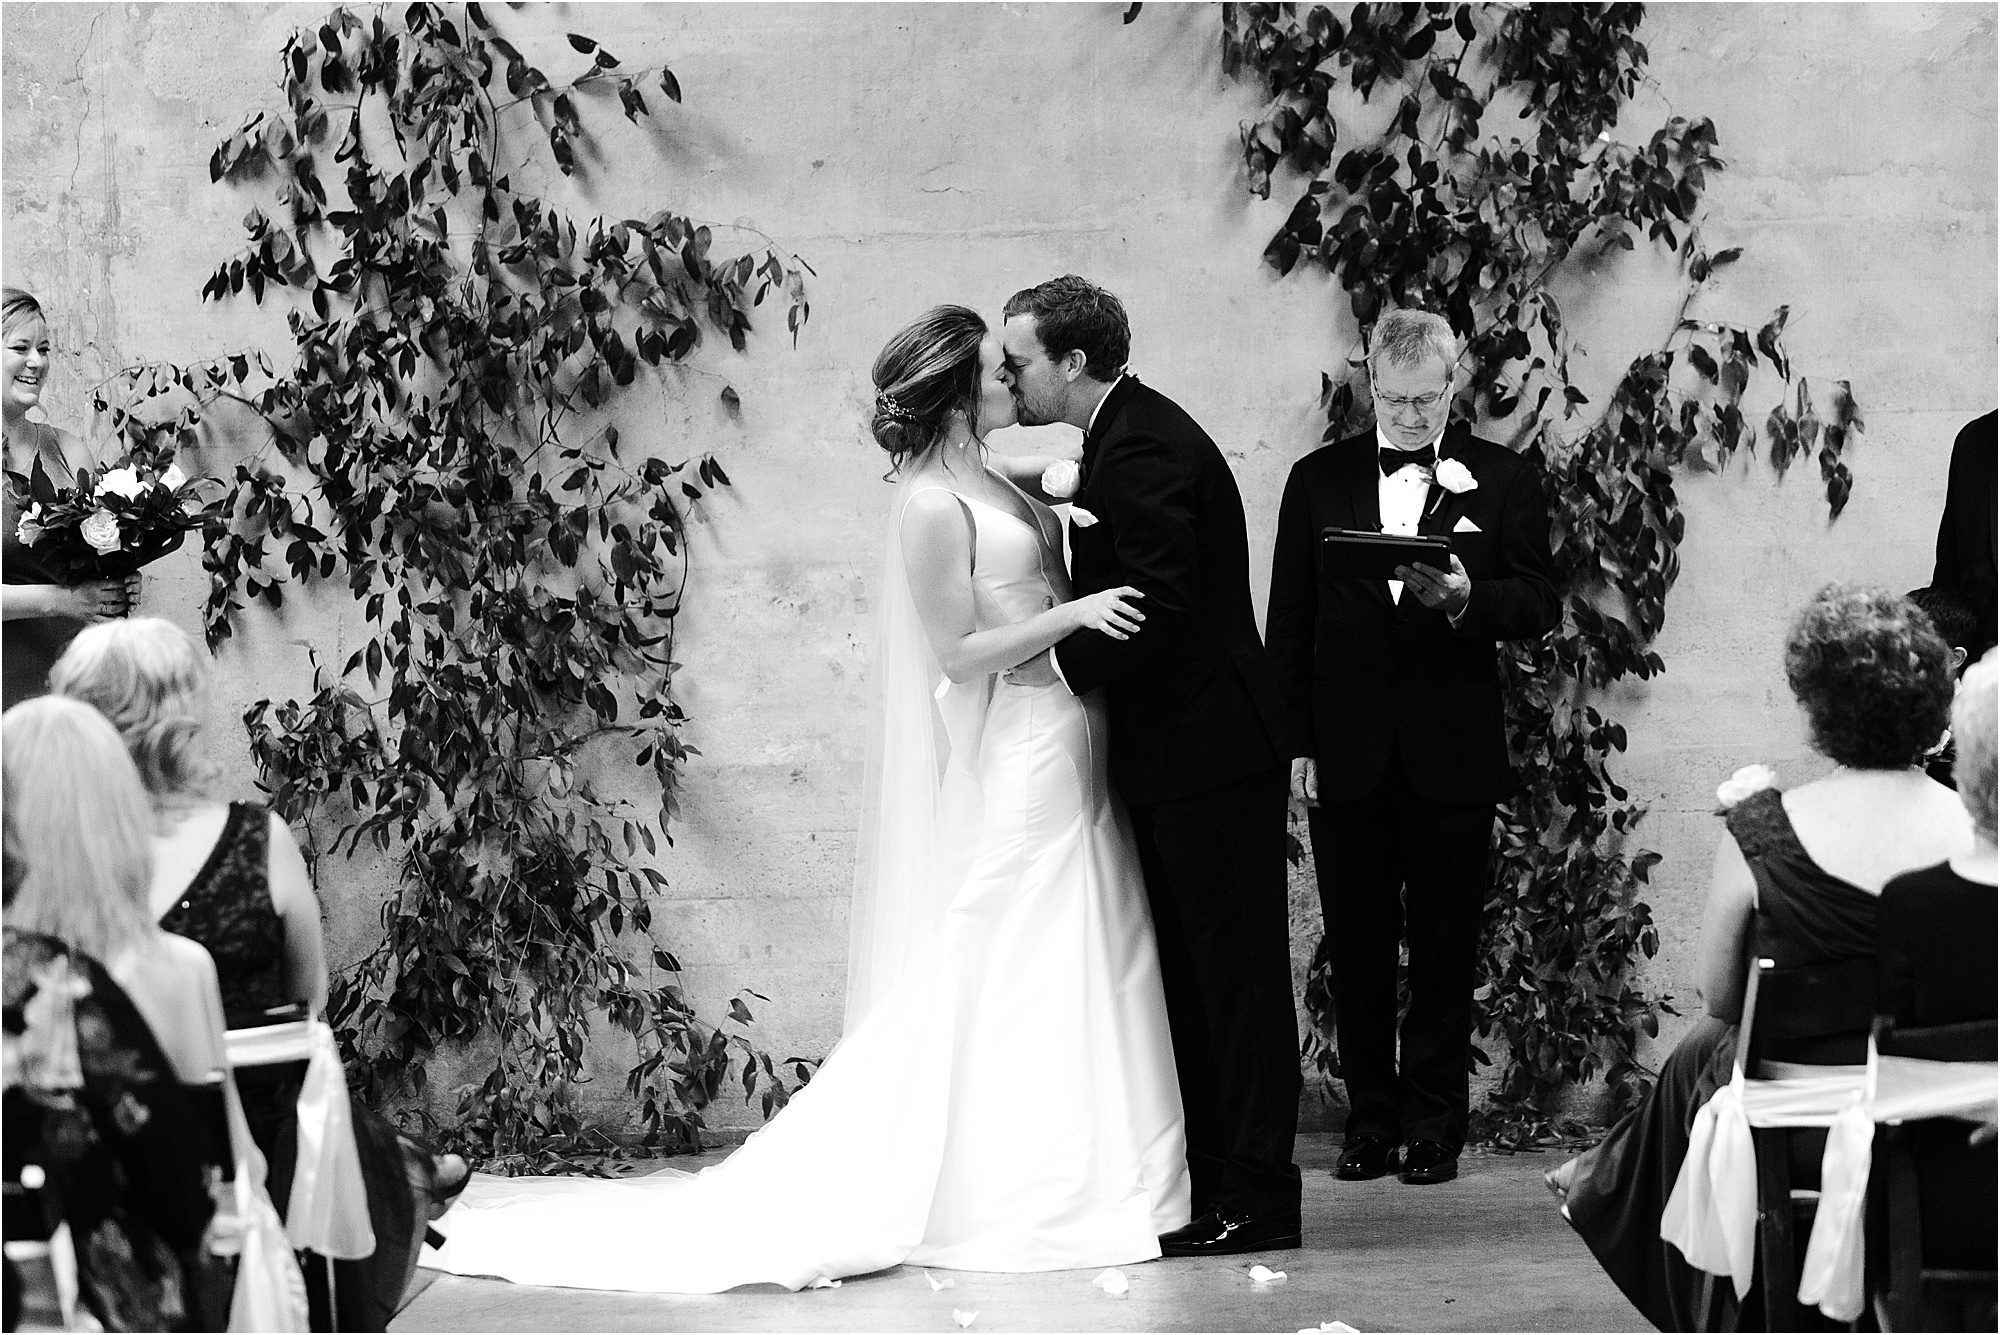 first kiss at wedding ceremony in black and white